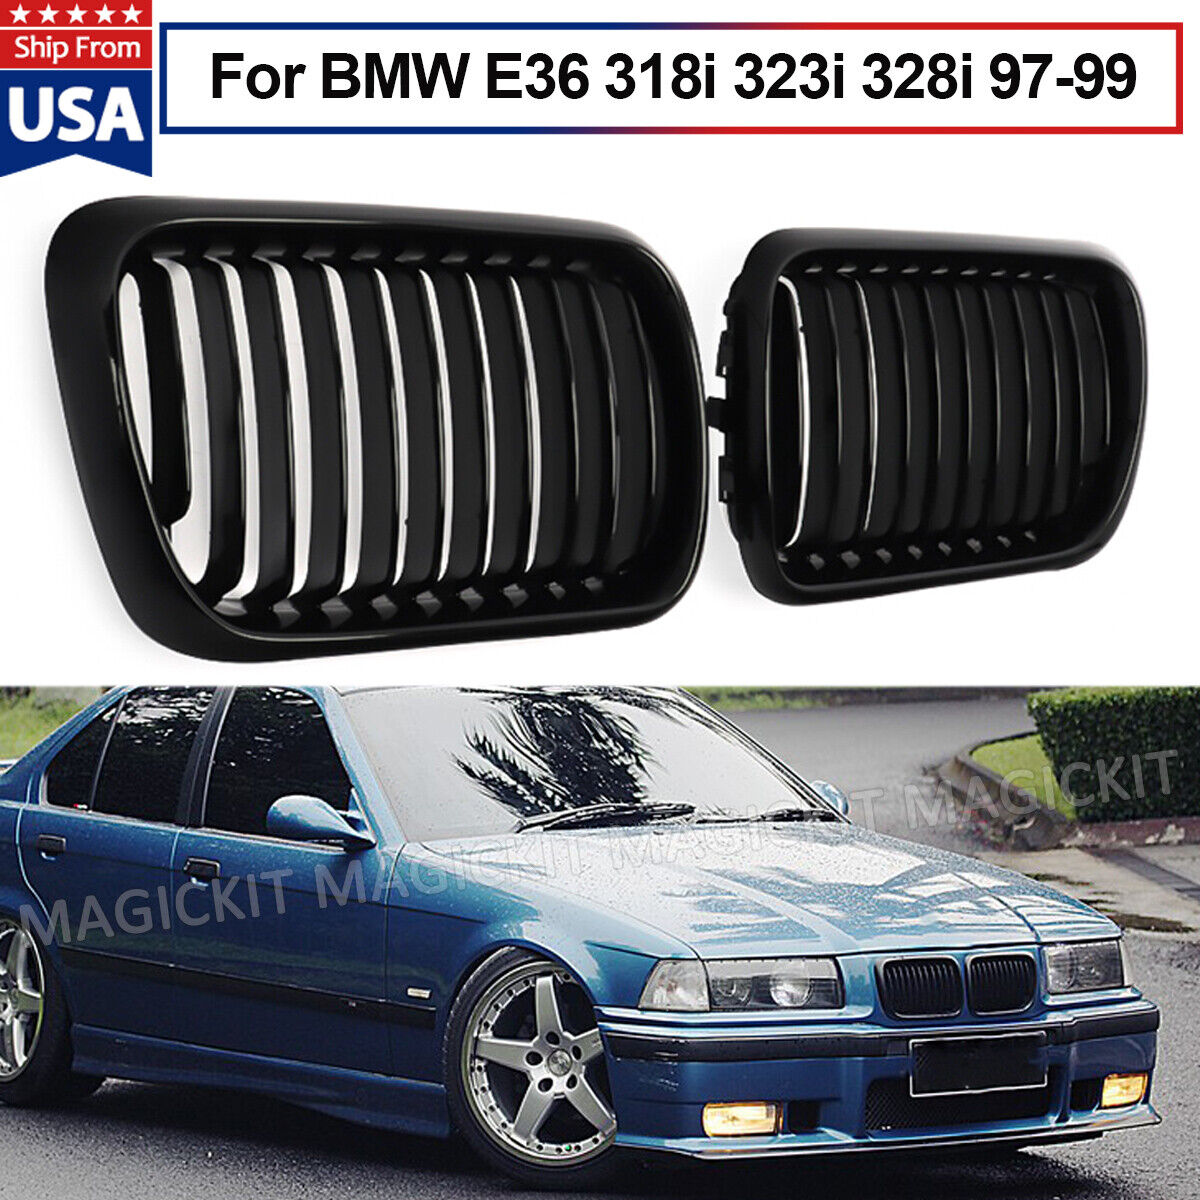 M Look Kidney Grille Grill Gloss Black For 97-99 BMW M3 E36 3 Series Compact US